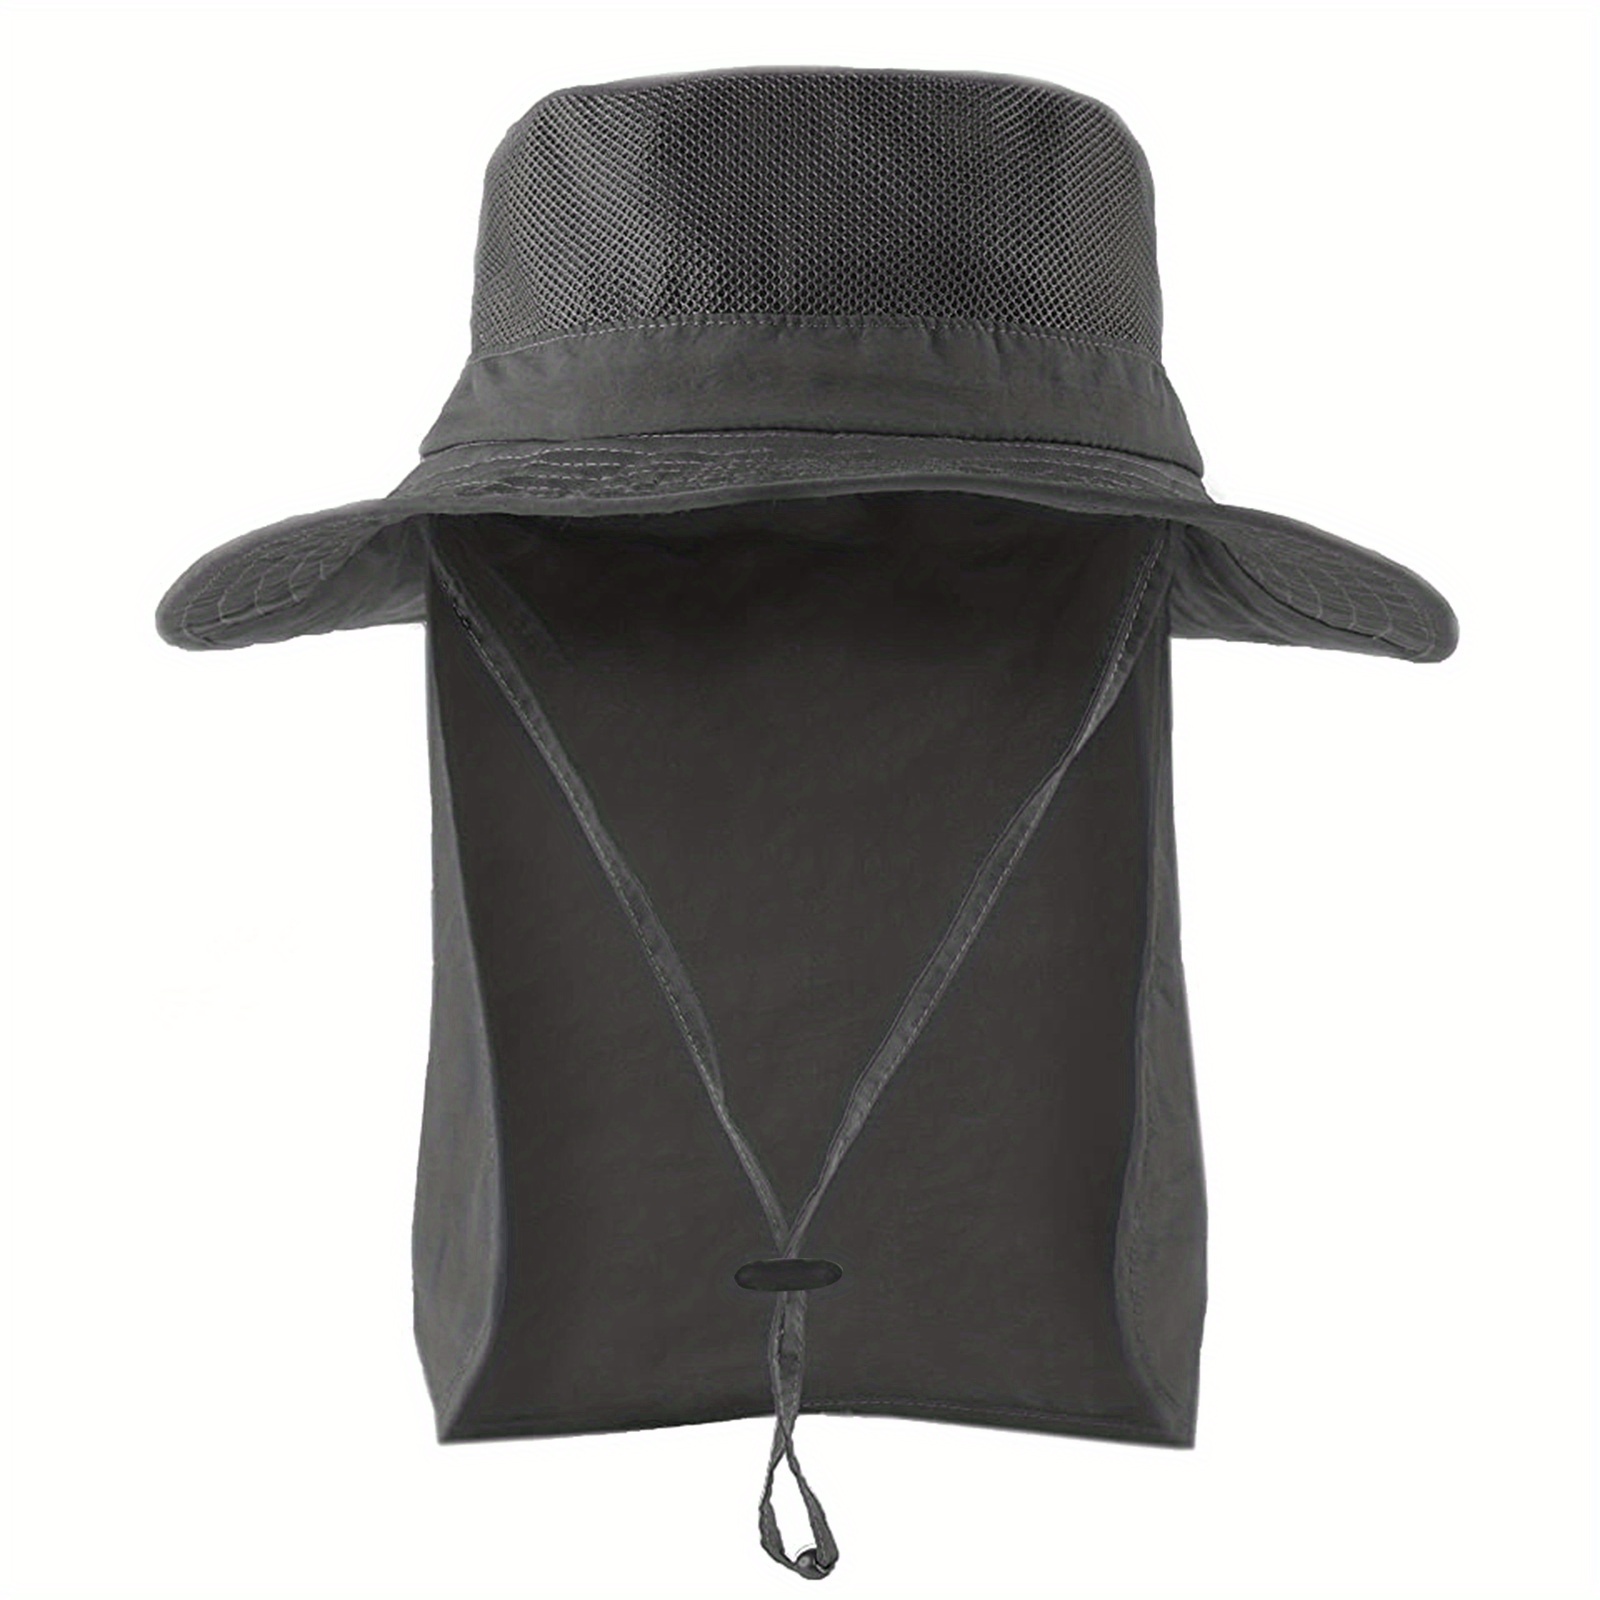 Sun Hat with Neck Flap Quick Dry UV Protection Caps Fishing Hat,ArmyGreen，G115843  